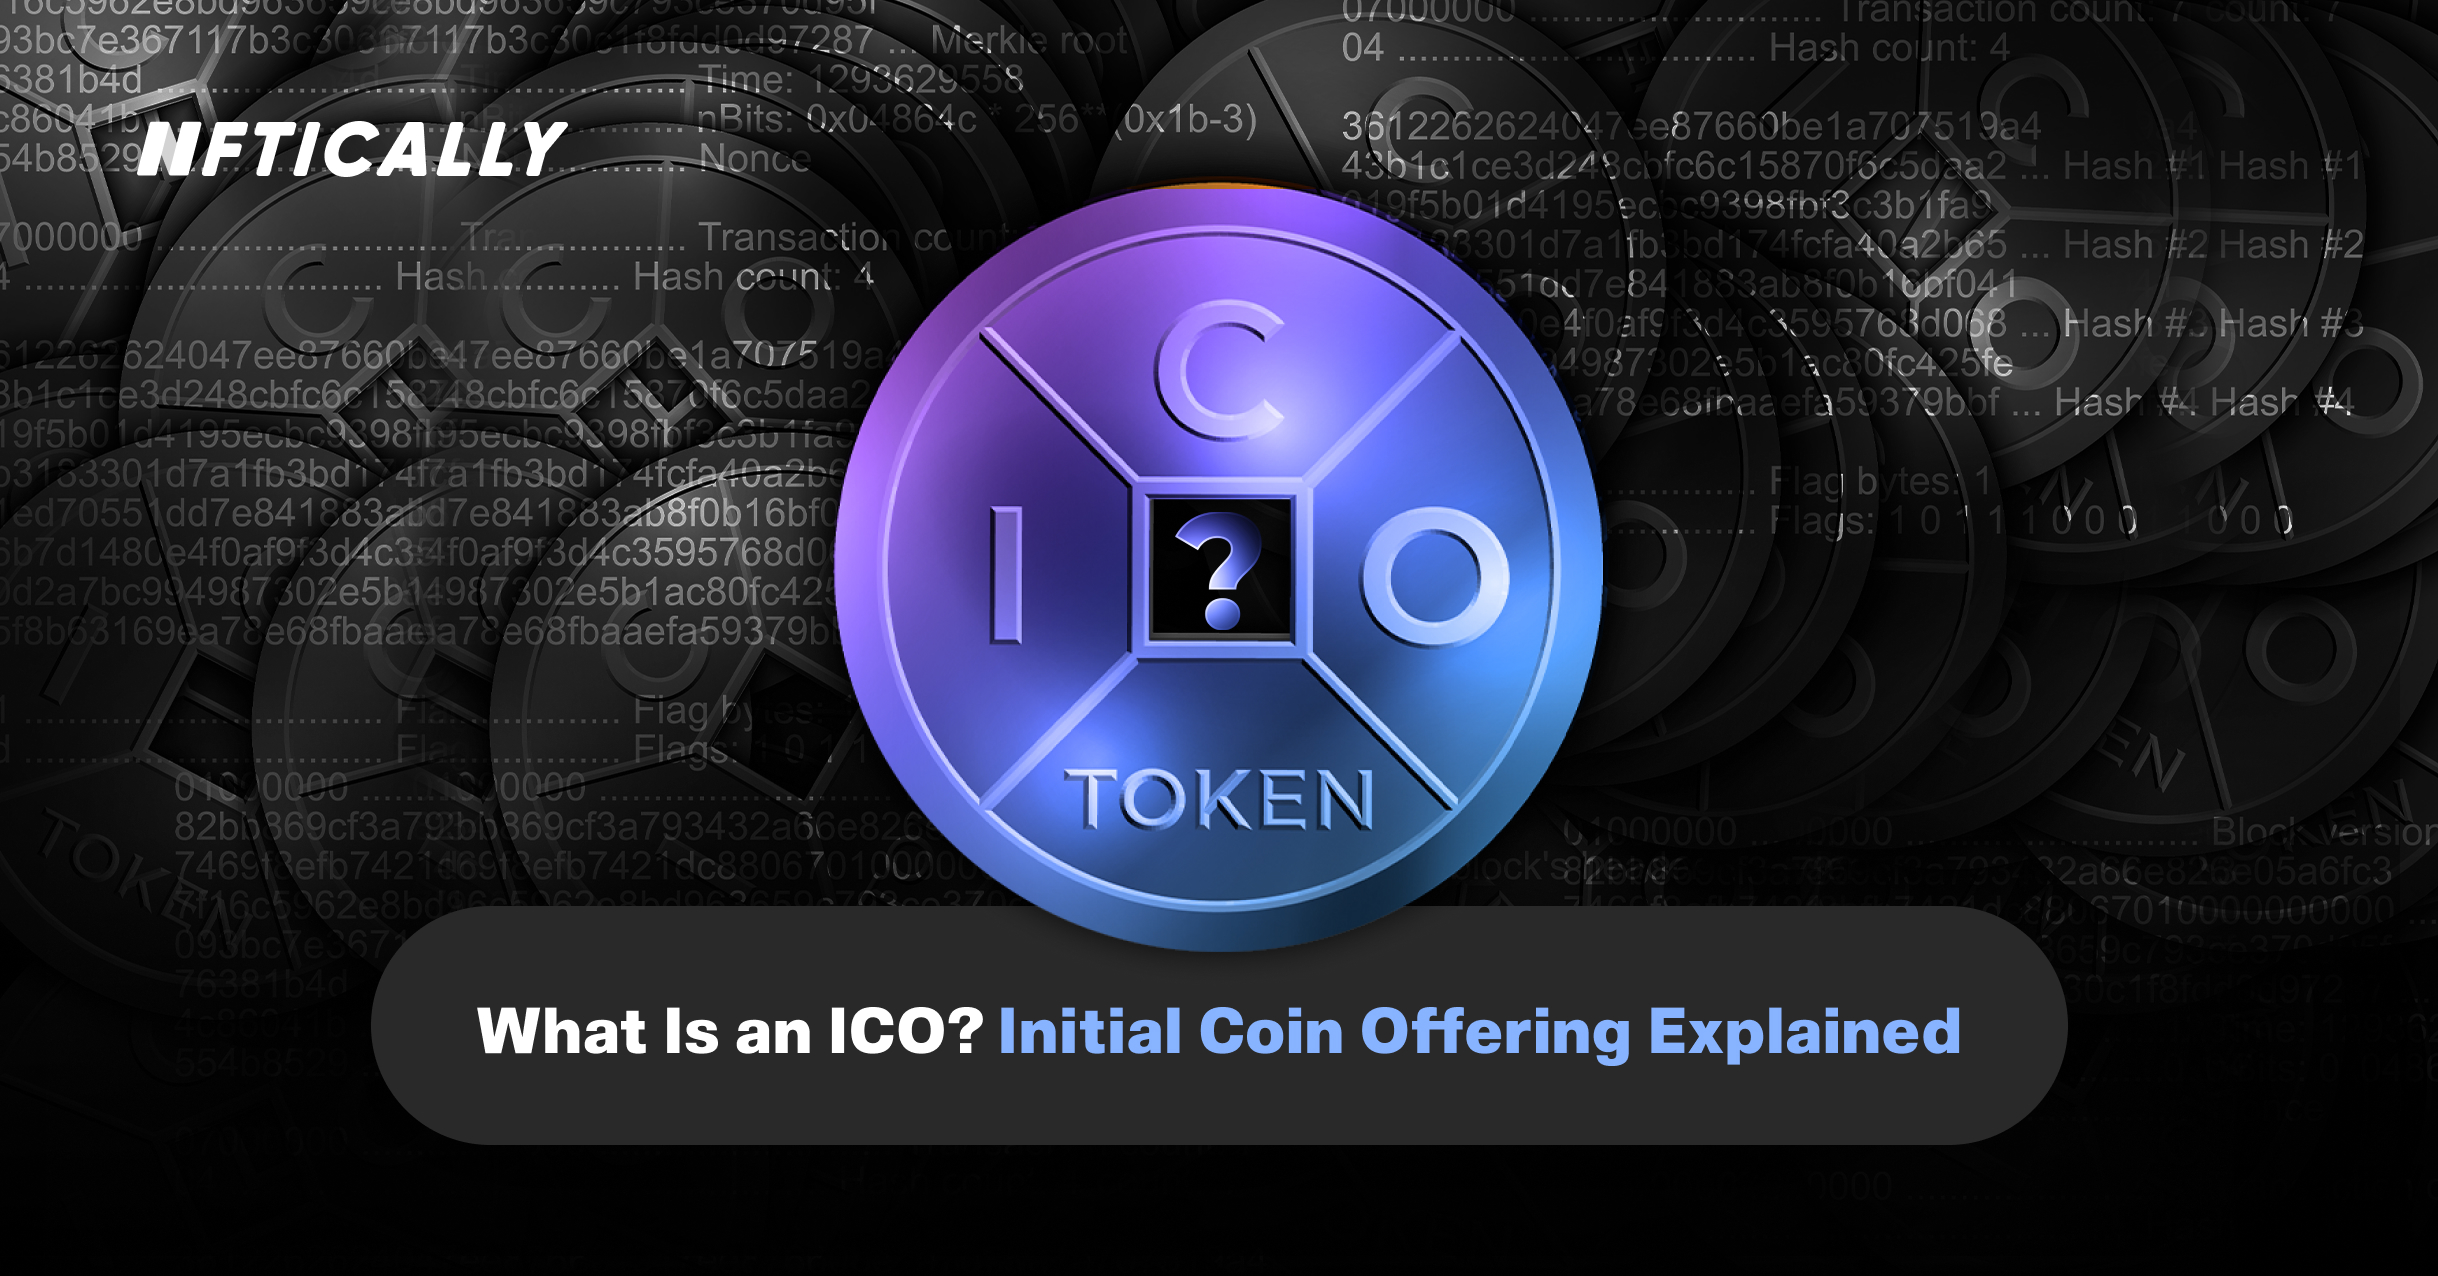 What Is an ICO? Initial Coin Offering Explained